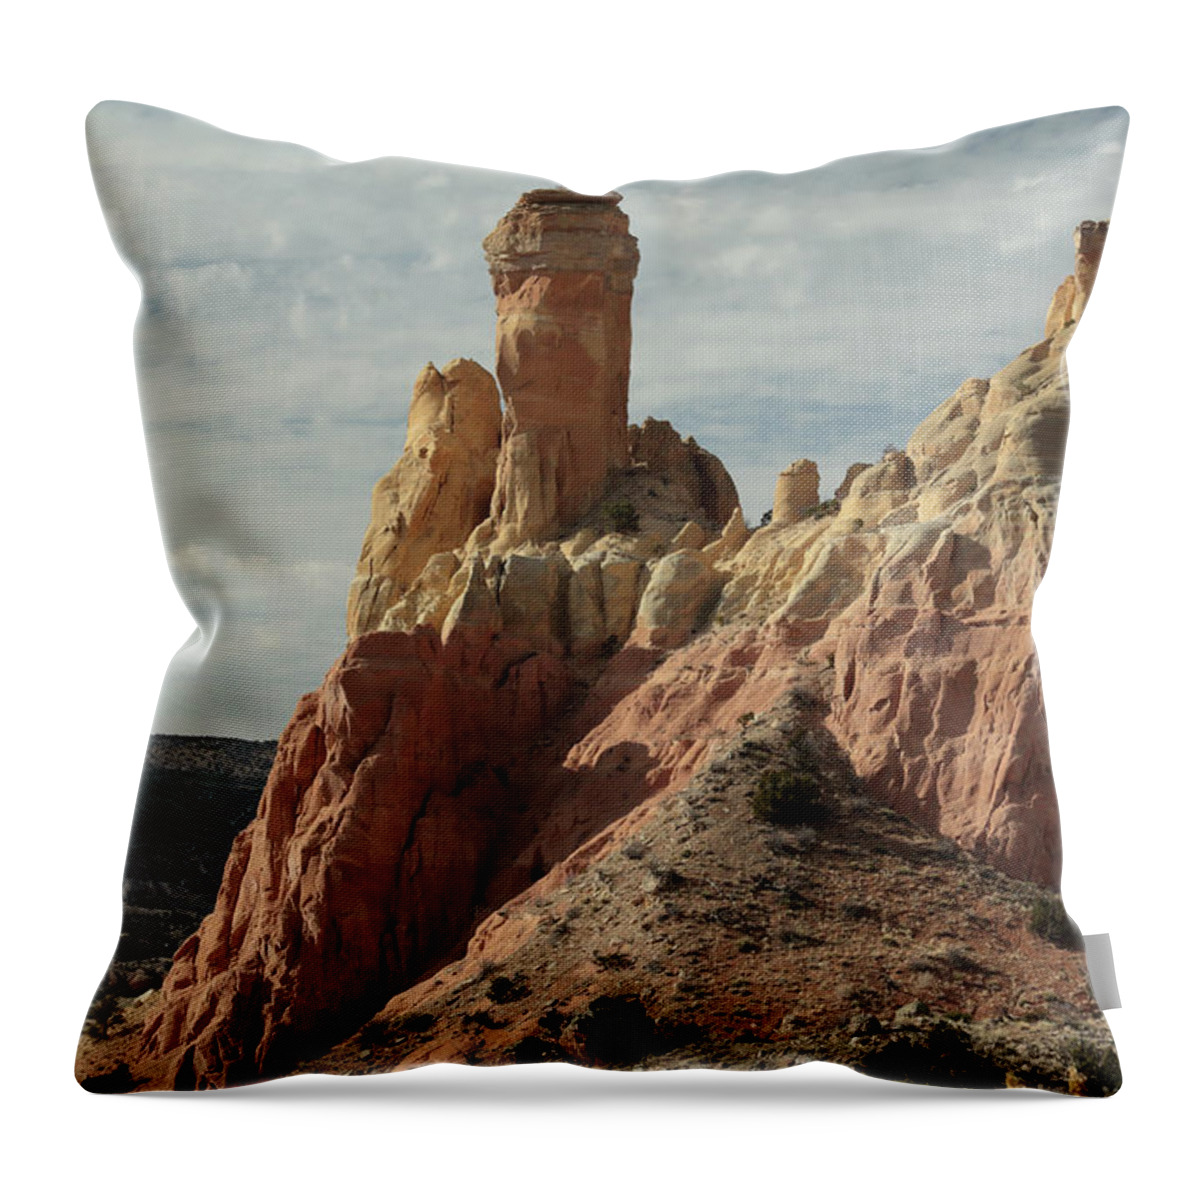 Chimney Throw Pillow featuring the photograph Chimney Rock by David Diaz